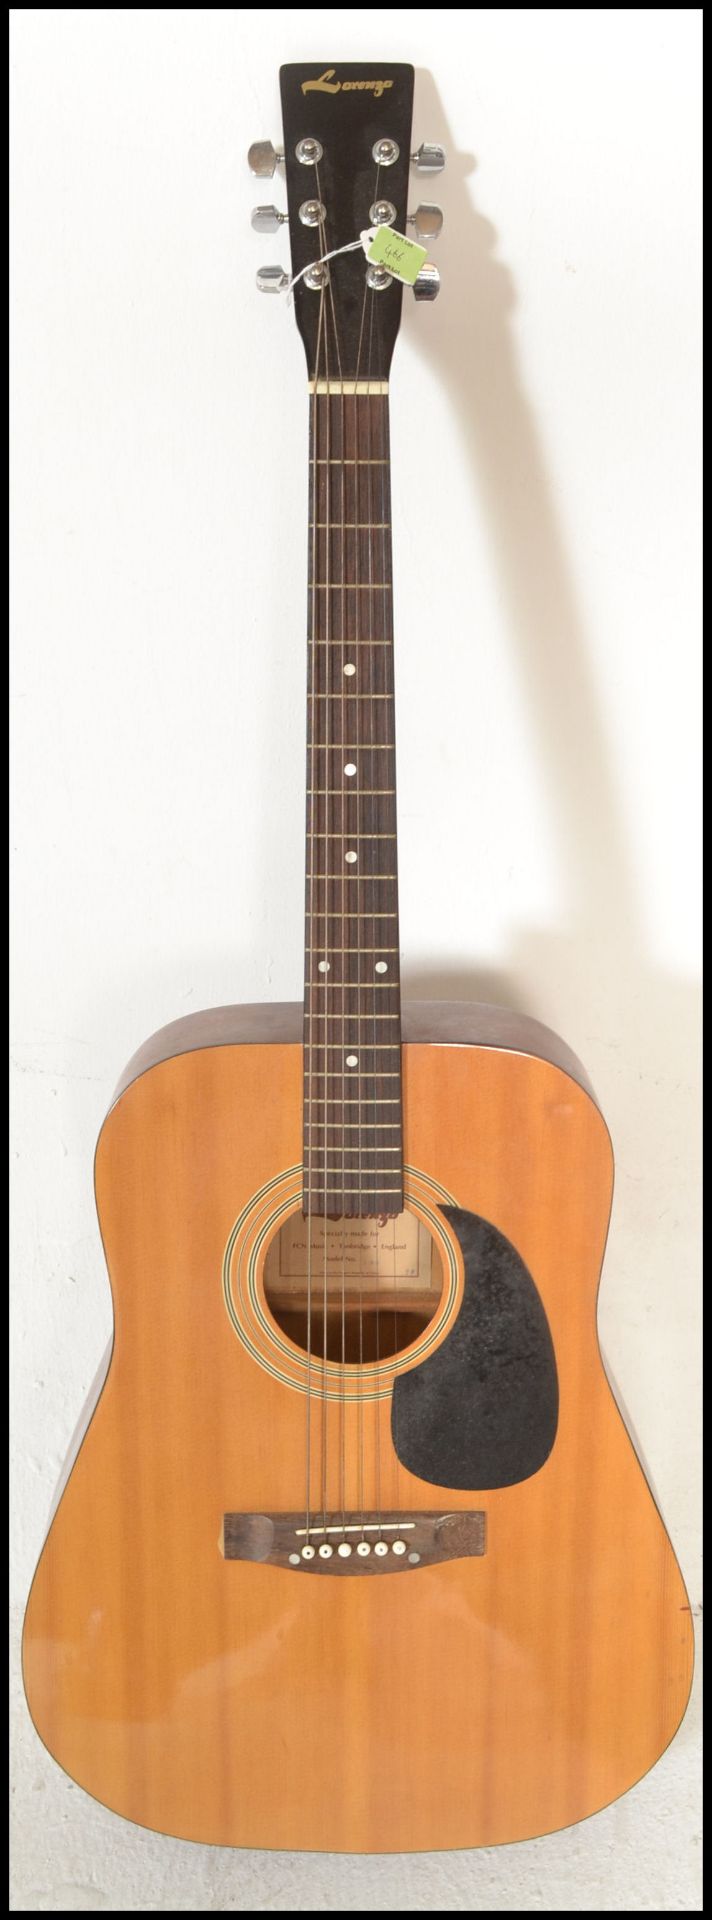 A vintage Dulcet classic six string acoustic guitar model 3057 having a shaped hollow body with - Bild 4 aus 8